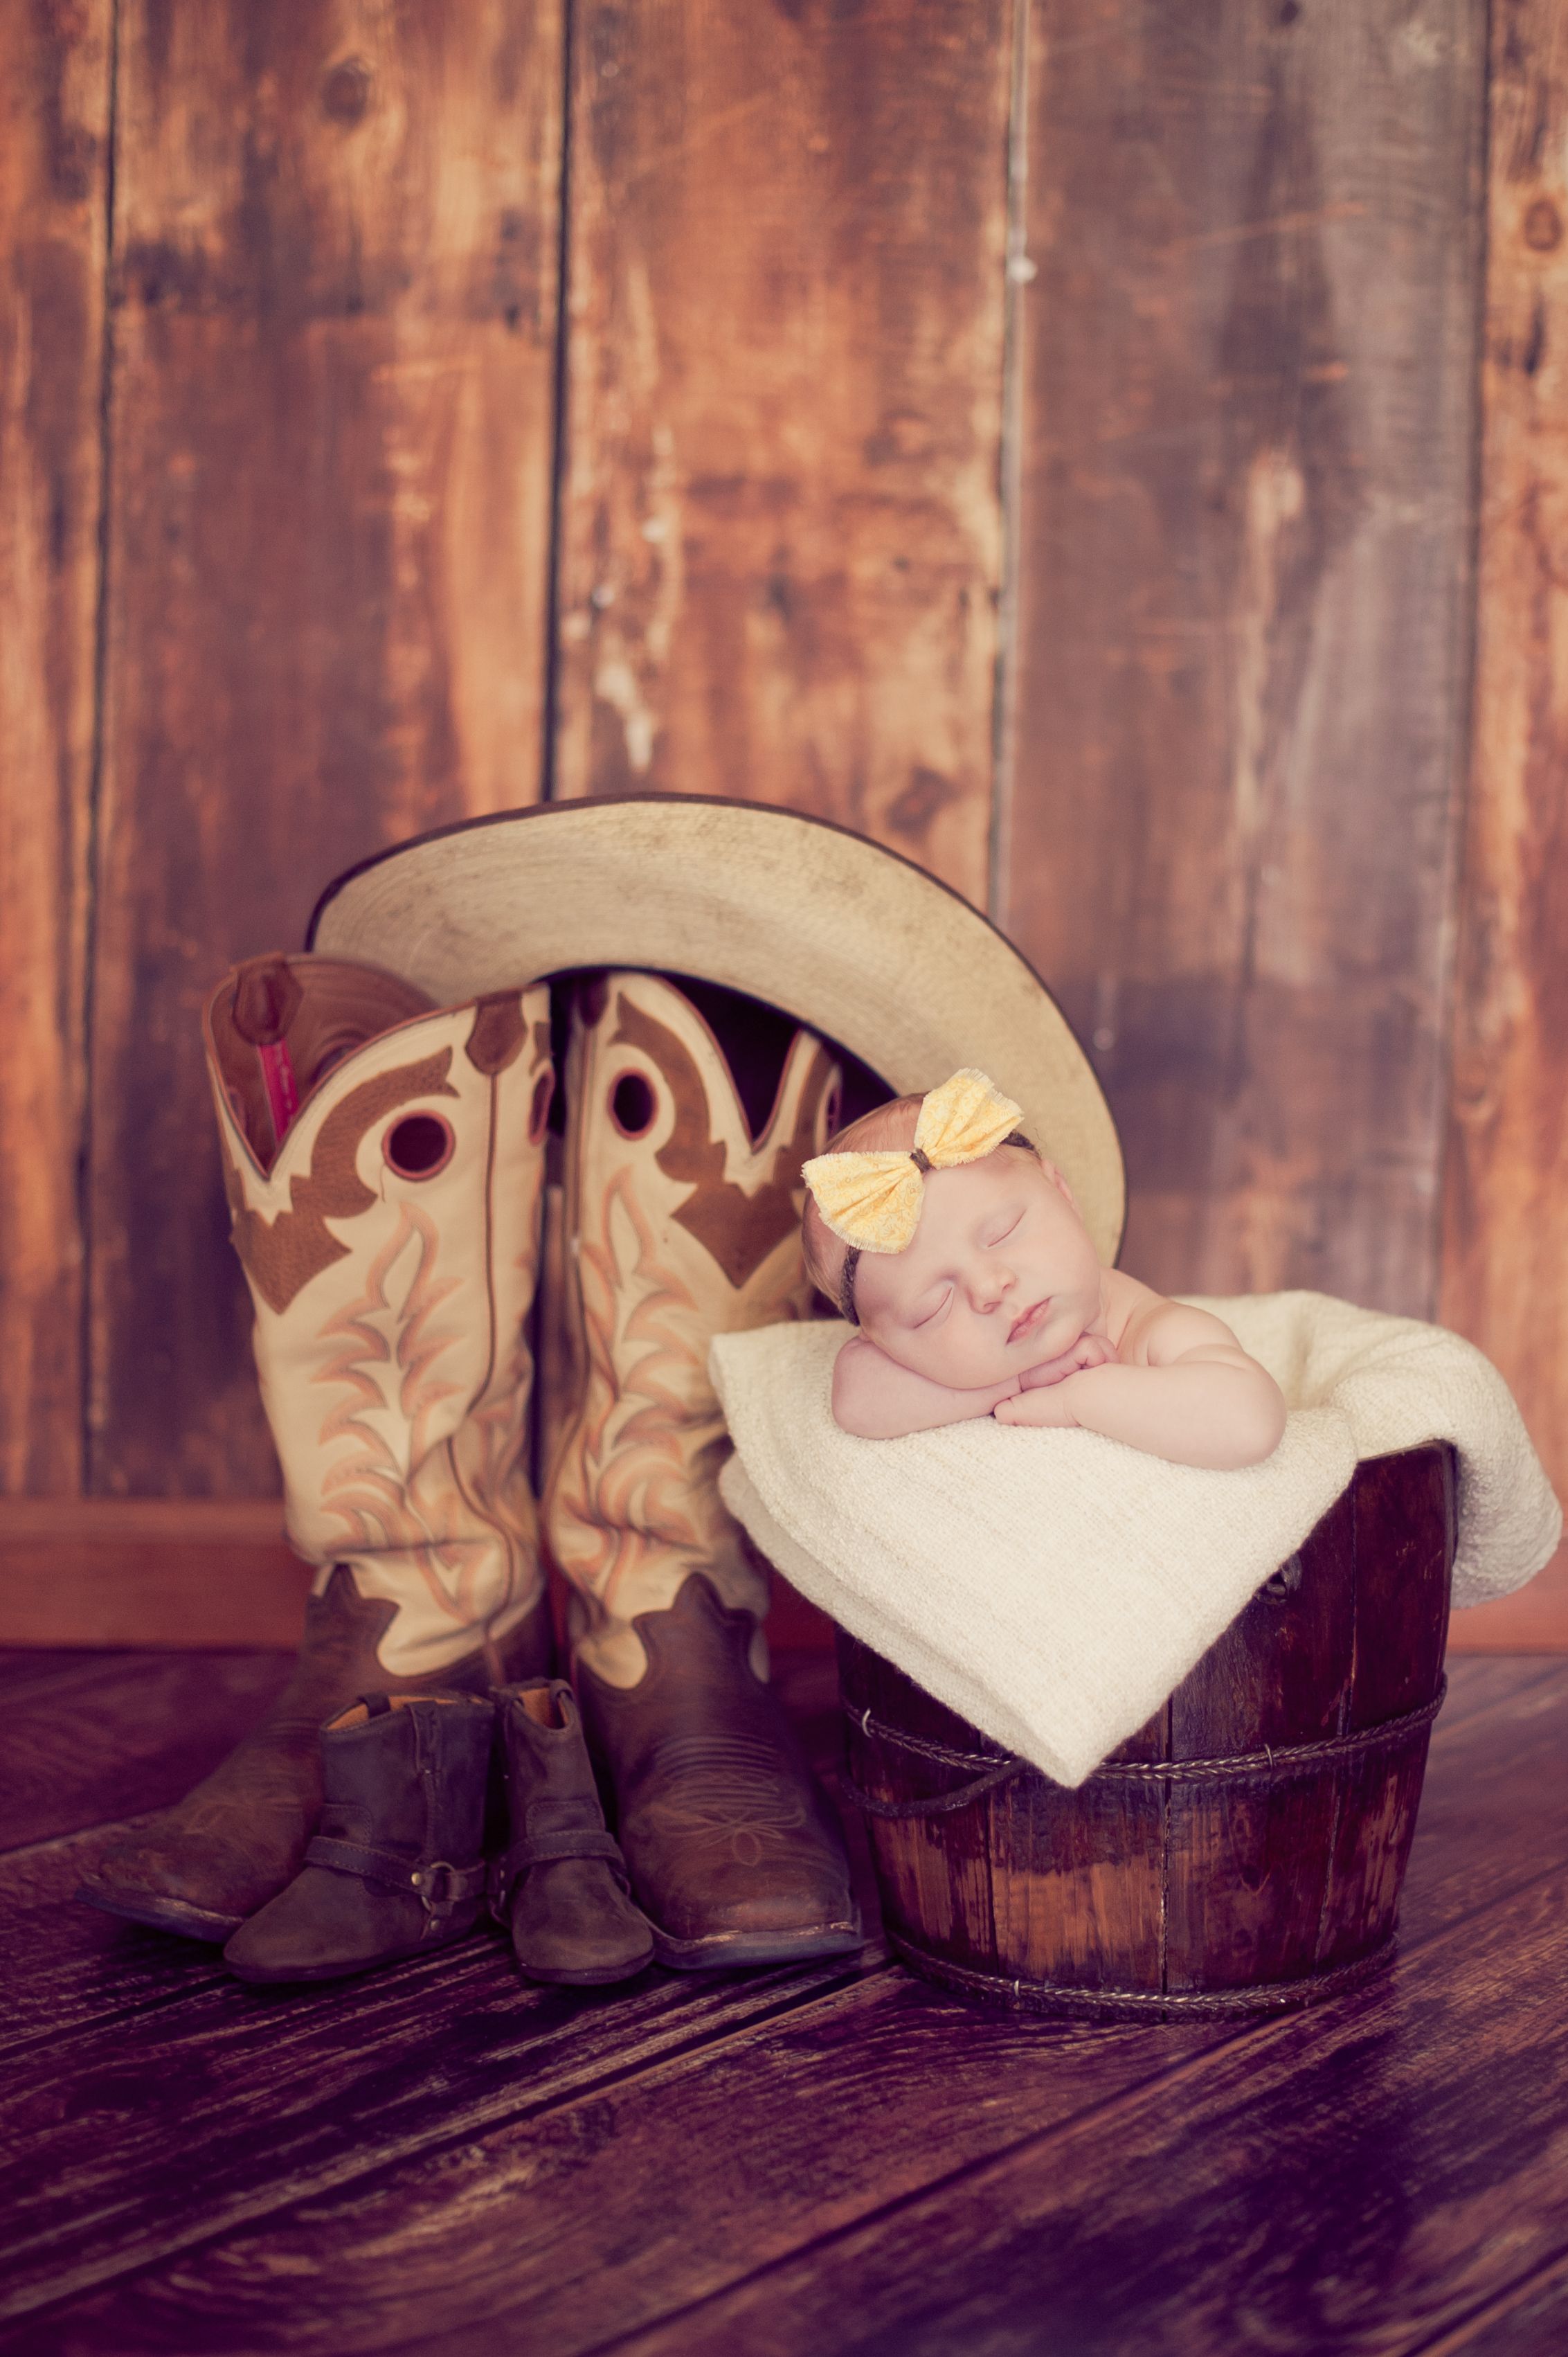 country girl photography ideas